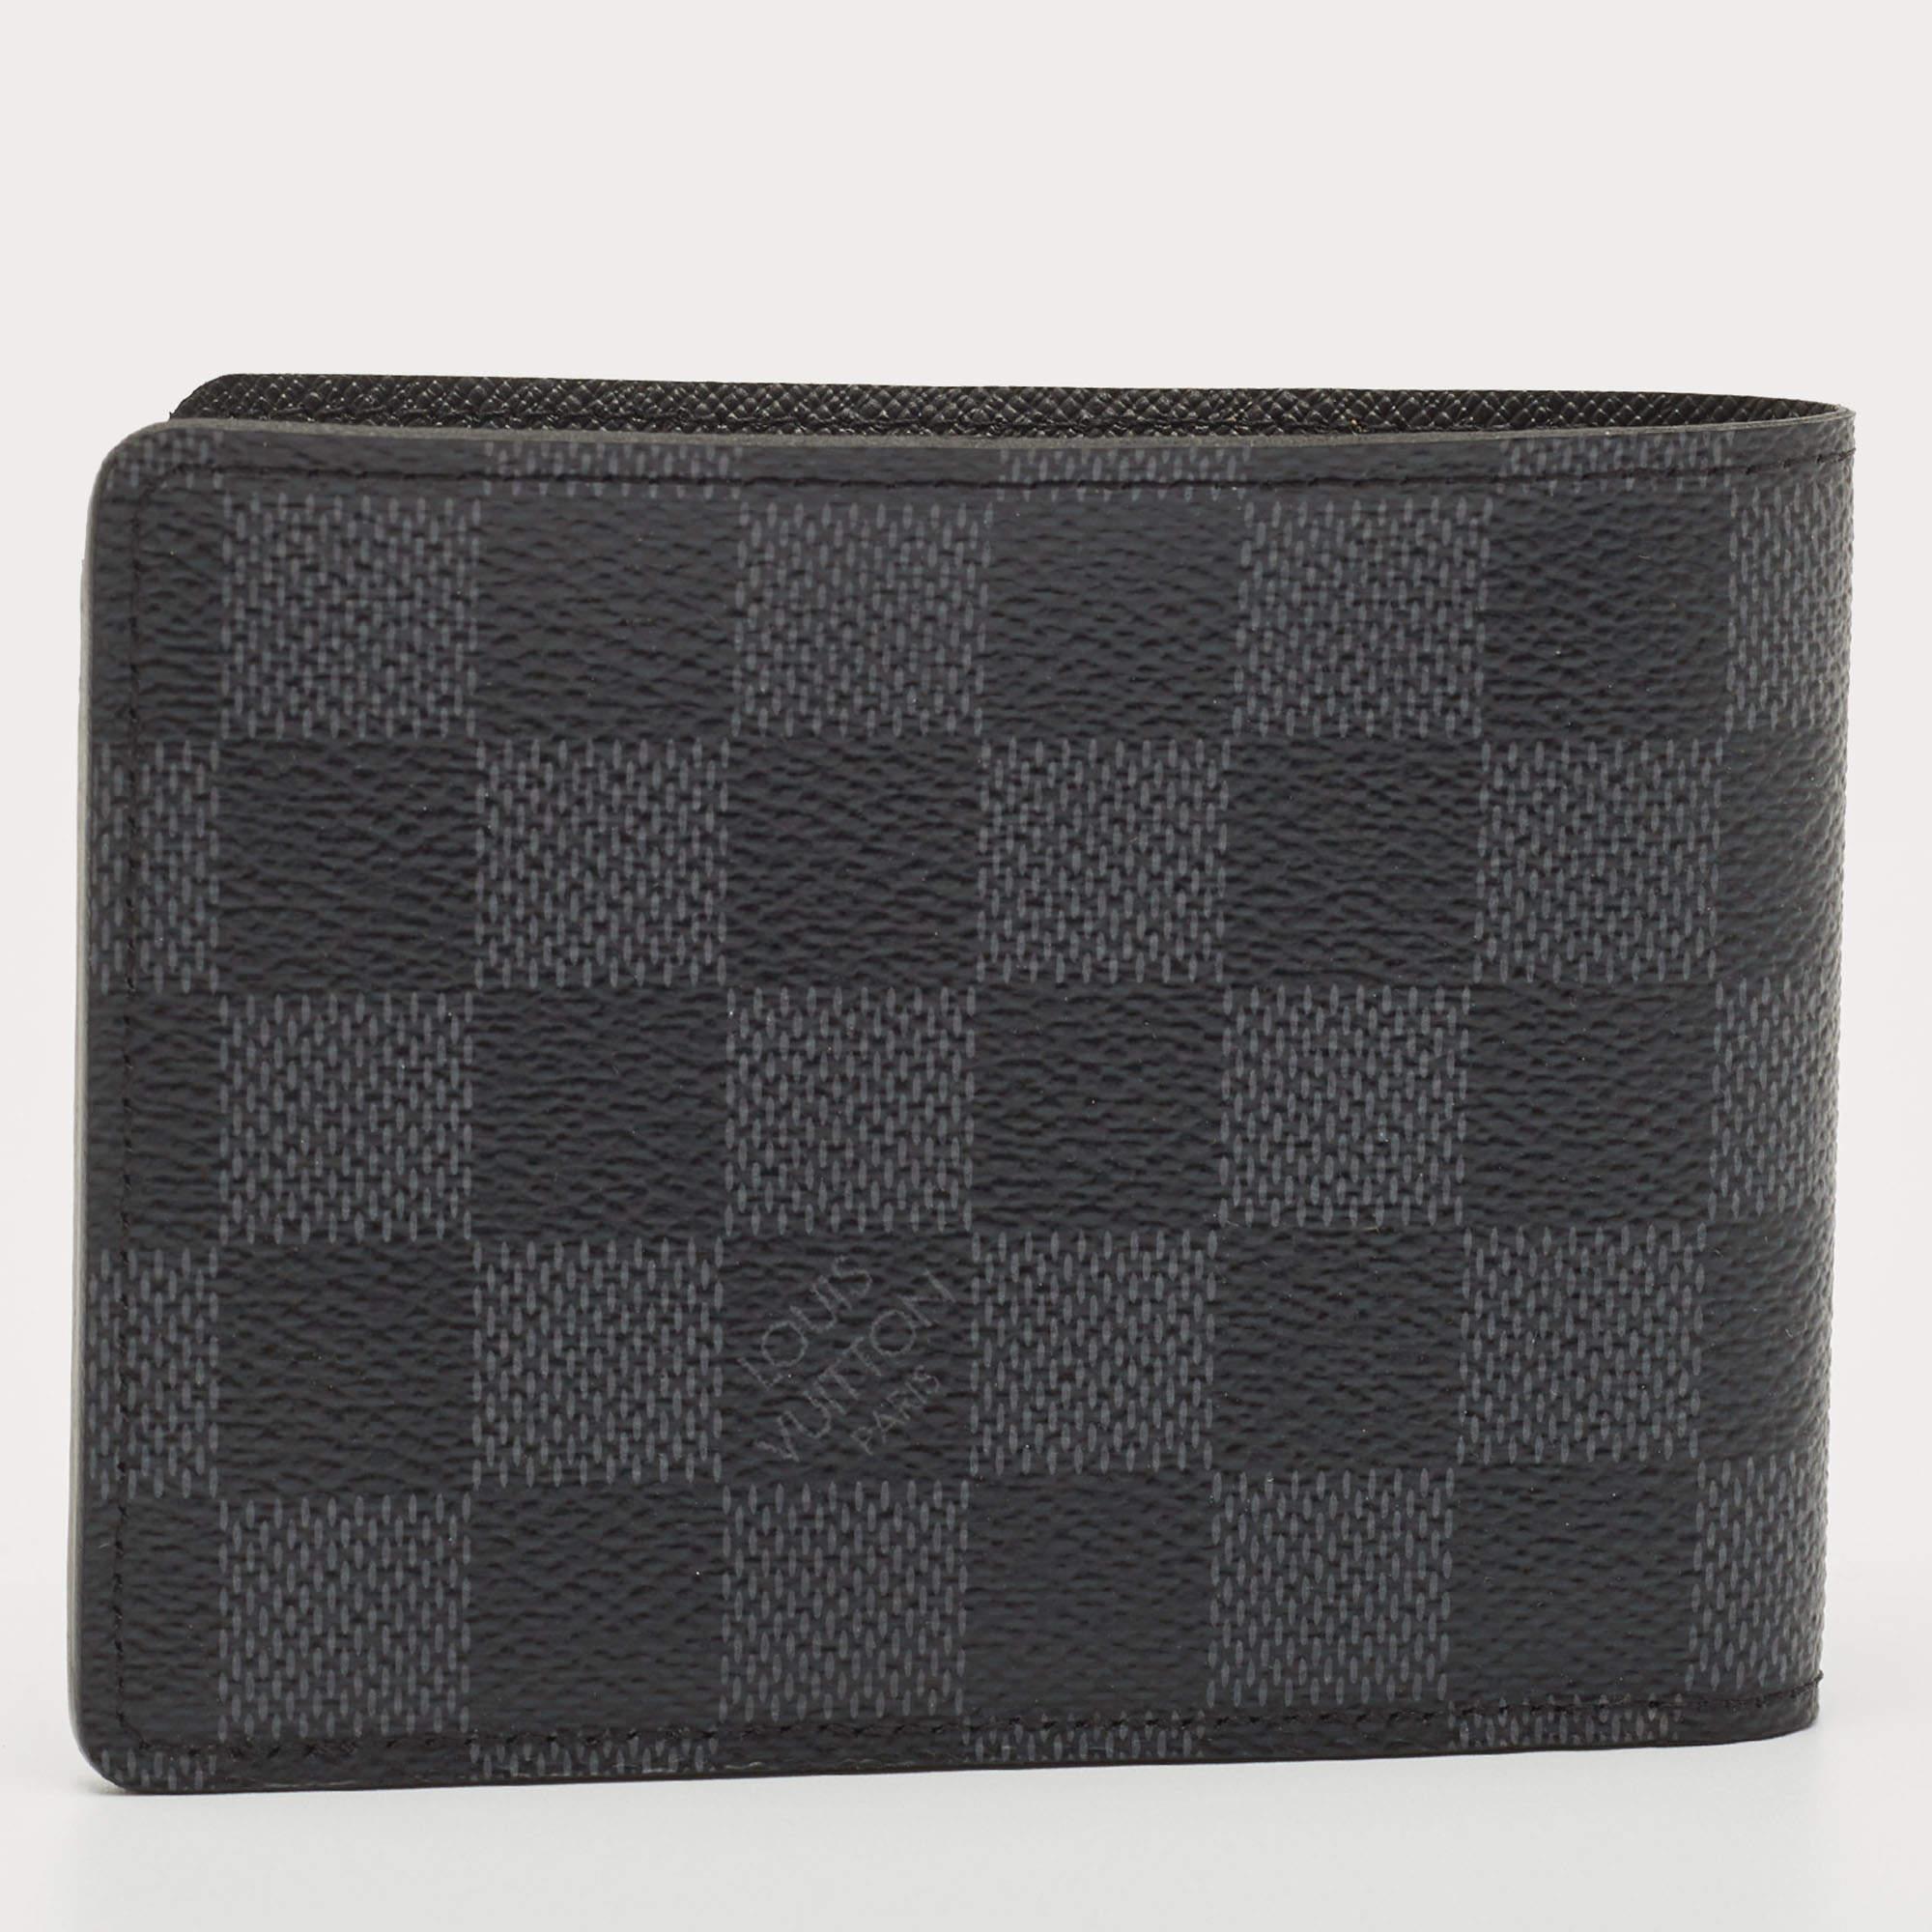 Keep your monetary essentials organized with the compartmentalized interior of this Louis Vuitton wallet. It opens in a bifold style and comes made from the Damier Cobalt canvas.

